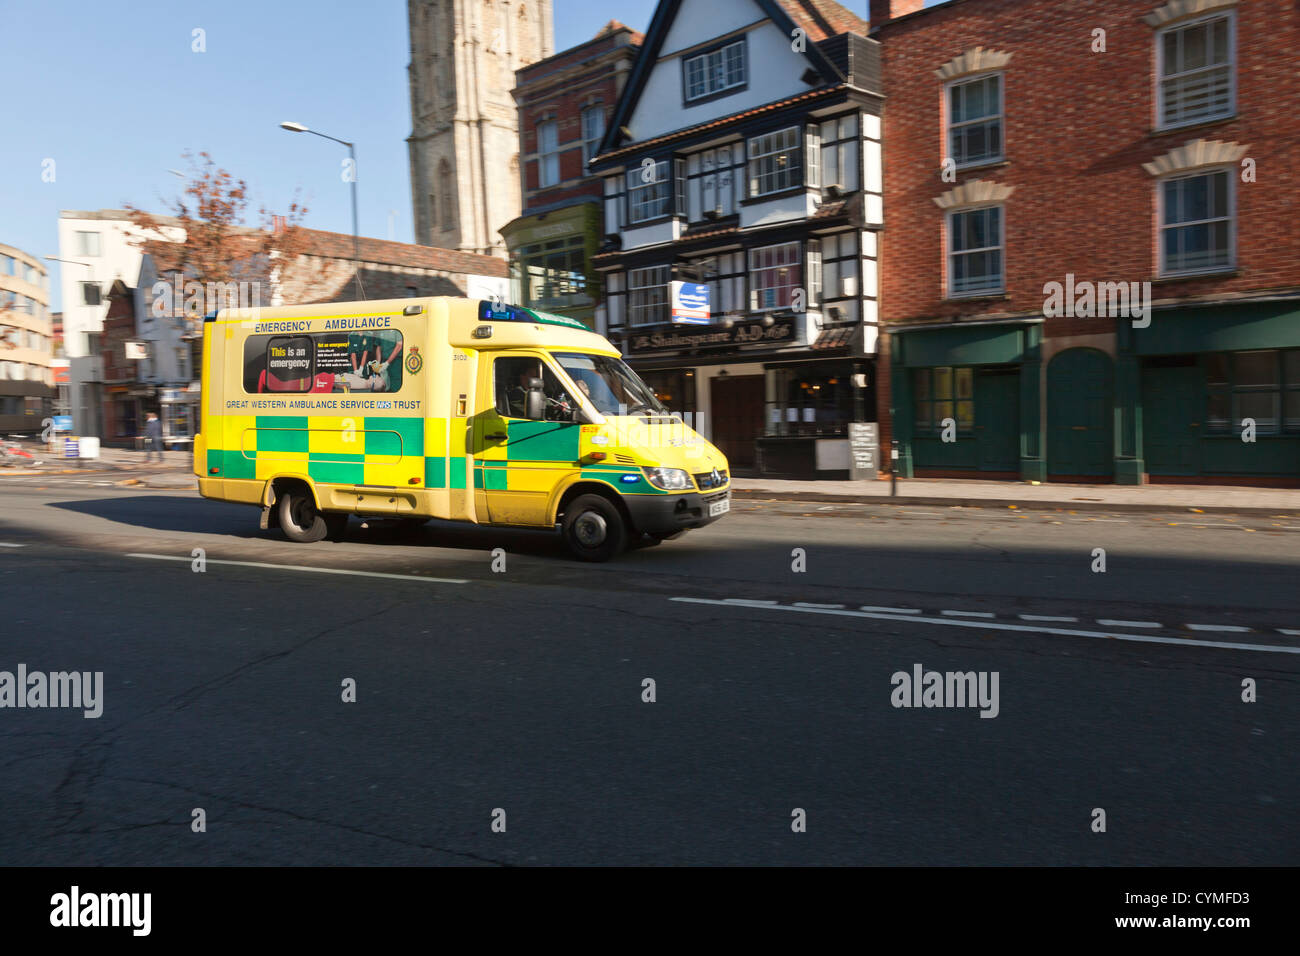 Ambulance racing to assist in an emergency. Stock Photo